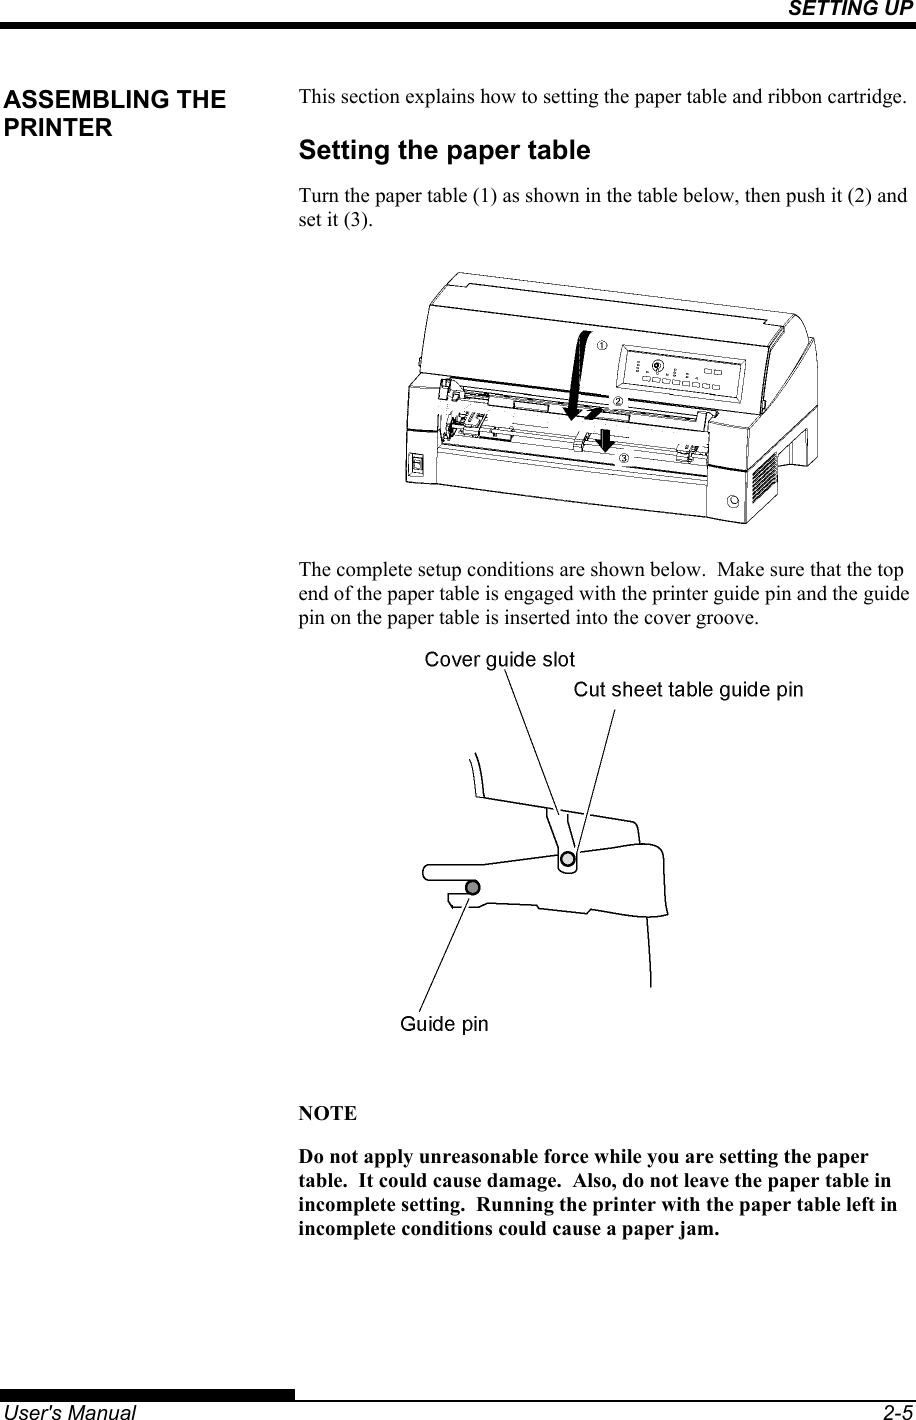 SETTING UP   User&apos;s Manual  2-5 This section explains how to setting the paper table and ribbon cartridge. Setting the paper table Turn the paper table (1) as shown in the table below, then push it (2) and set it (3).  The complete setup conditions are shown below.  Make sure that the top end of the paper table is engaged with the printer guide pin and the guide pin on the paper table is inserted into the cover groove.   NOTE Do not apply unreasonable force while you are setting the paper table.  It could cause damage.  Also, do not leave the paper table in incomplete setting.  Running the printer with the paper table left in incomplete conditions could cause a paper jam. ASSEMBLING THE PRINTER 